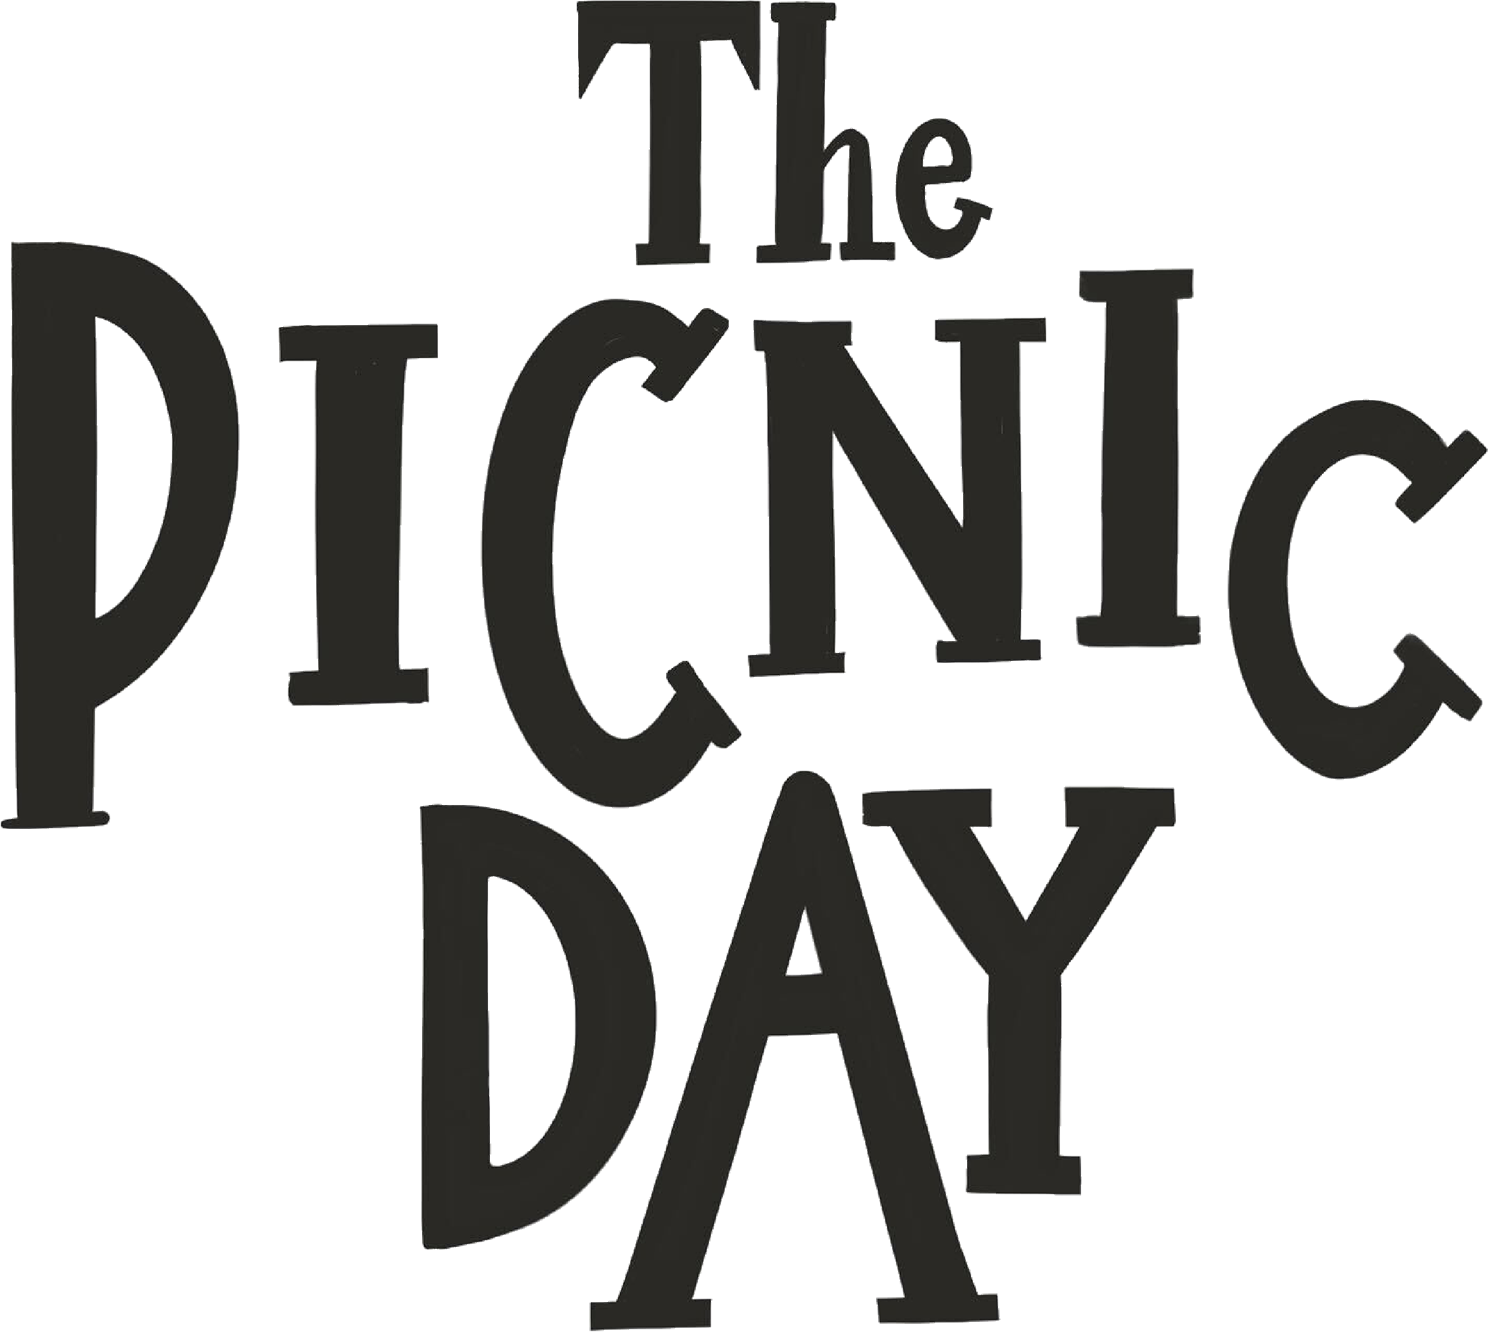 The PICNIC DAY